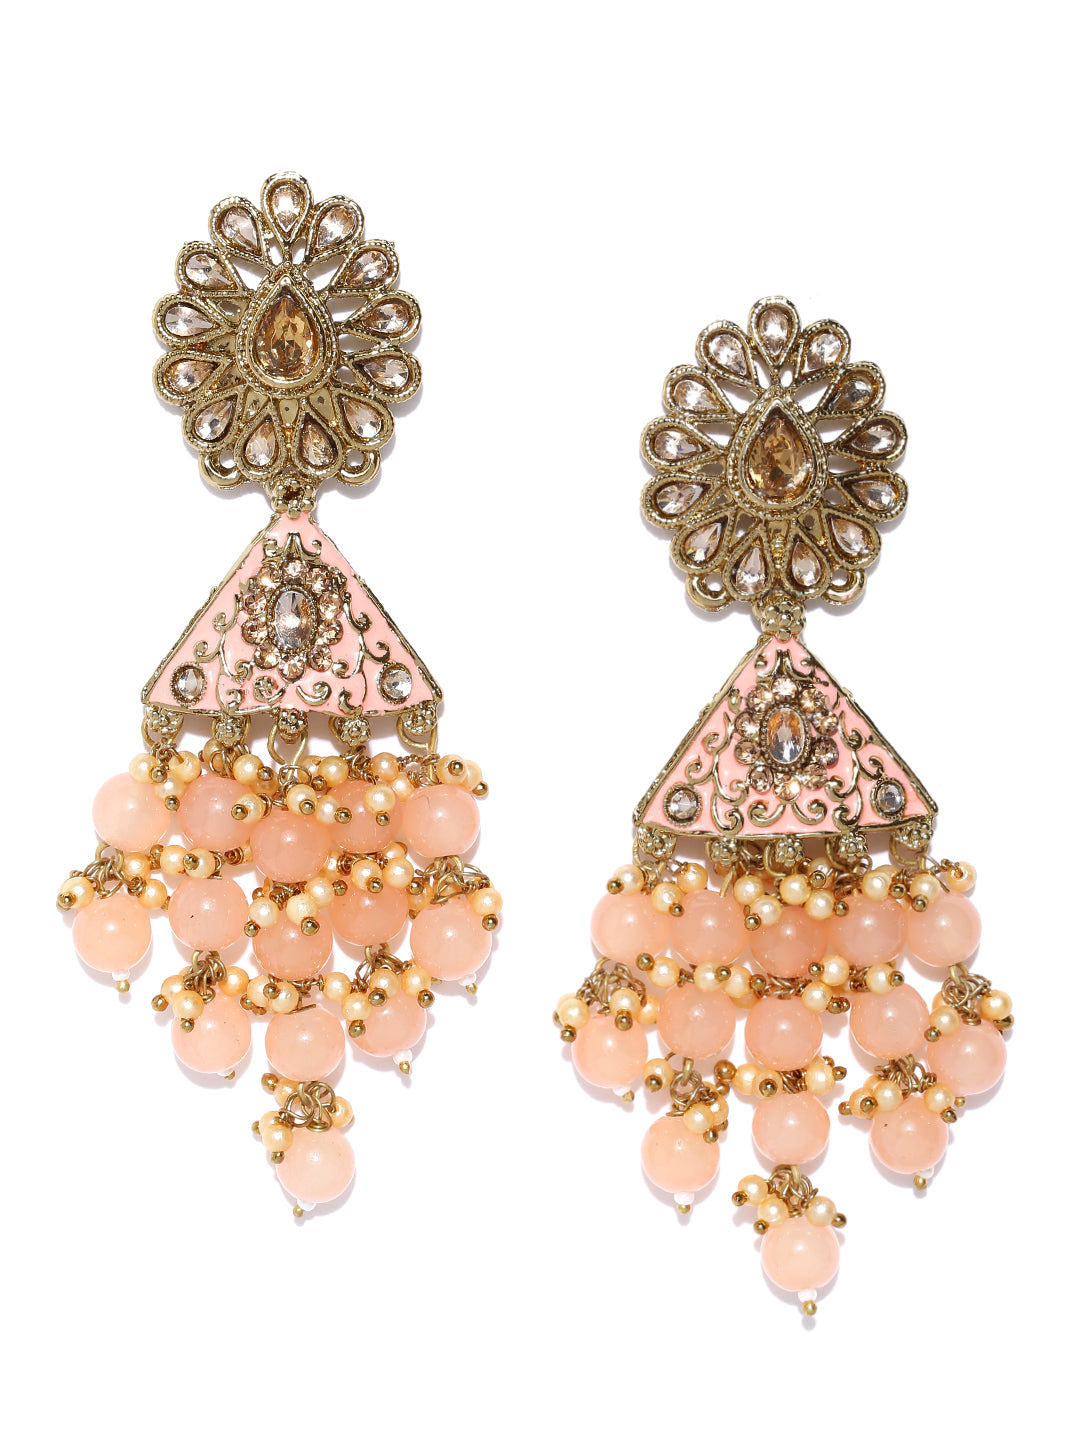 Gold-Plated Stone Studded Floral Patterned Meenakari Earrings with Beads Drop in Peach Color